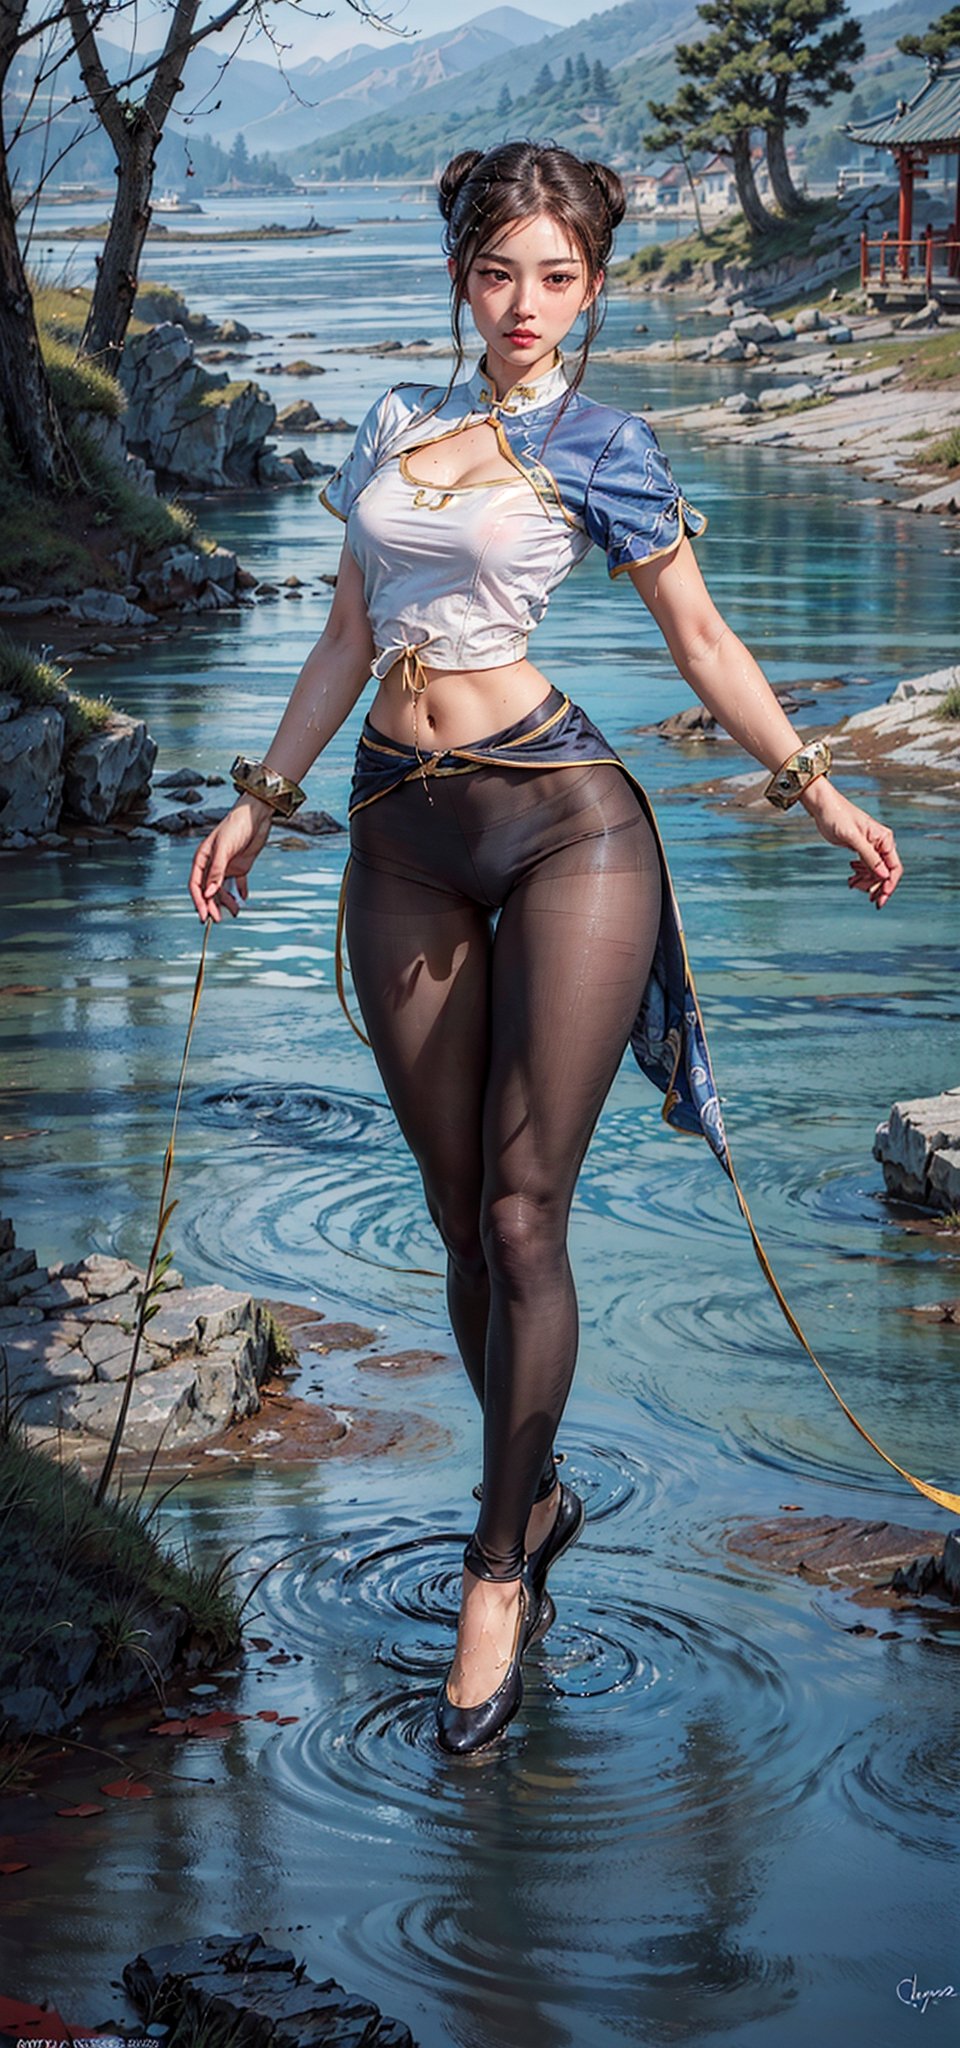 (8k, RAW photo, photorealistic:1.25), 1girl, (large breasts), half-naked, dynamic action pose, wet, wearing her signature outfit (a blue qipao, an early-20th-century Chinese dress, with golden accents, puffy sleeves, and a tight white waistband, bracelets with long spikes on both of her wrists), ((sheer crotchless black ripped pantyhose)), japanese dominatrix school girl outfit Sailor Moon inspired ((full body:1.5), (highly detailed skin:1.2), accentuated breasts, large pelvic, wide hip, narrow waist, curvy waist, ((slim, skinny waist:1.4)), seductress, tempting, pink nipples, pink pussy out, tibetan temple swamp lake with coy fish background, dynamic pose, well sunlit, ((looking at viewer)), ox horns tied bun style brown hair, Godpussy2, chunlims